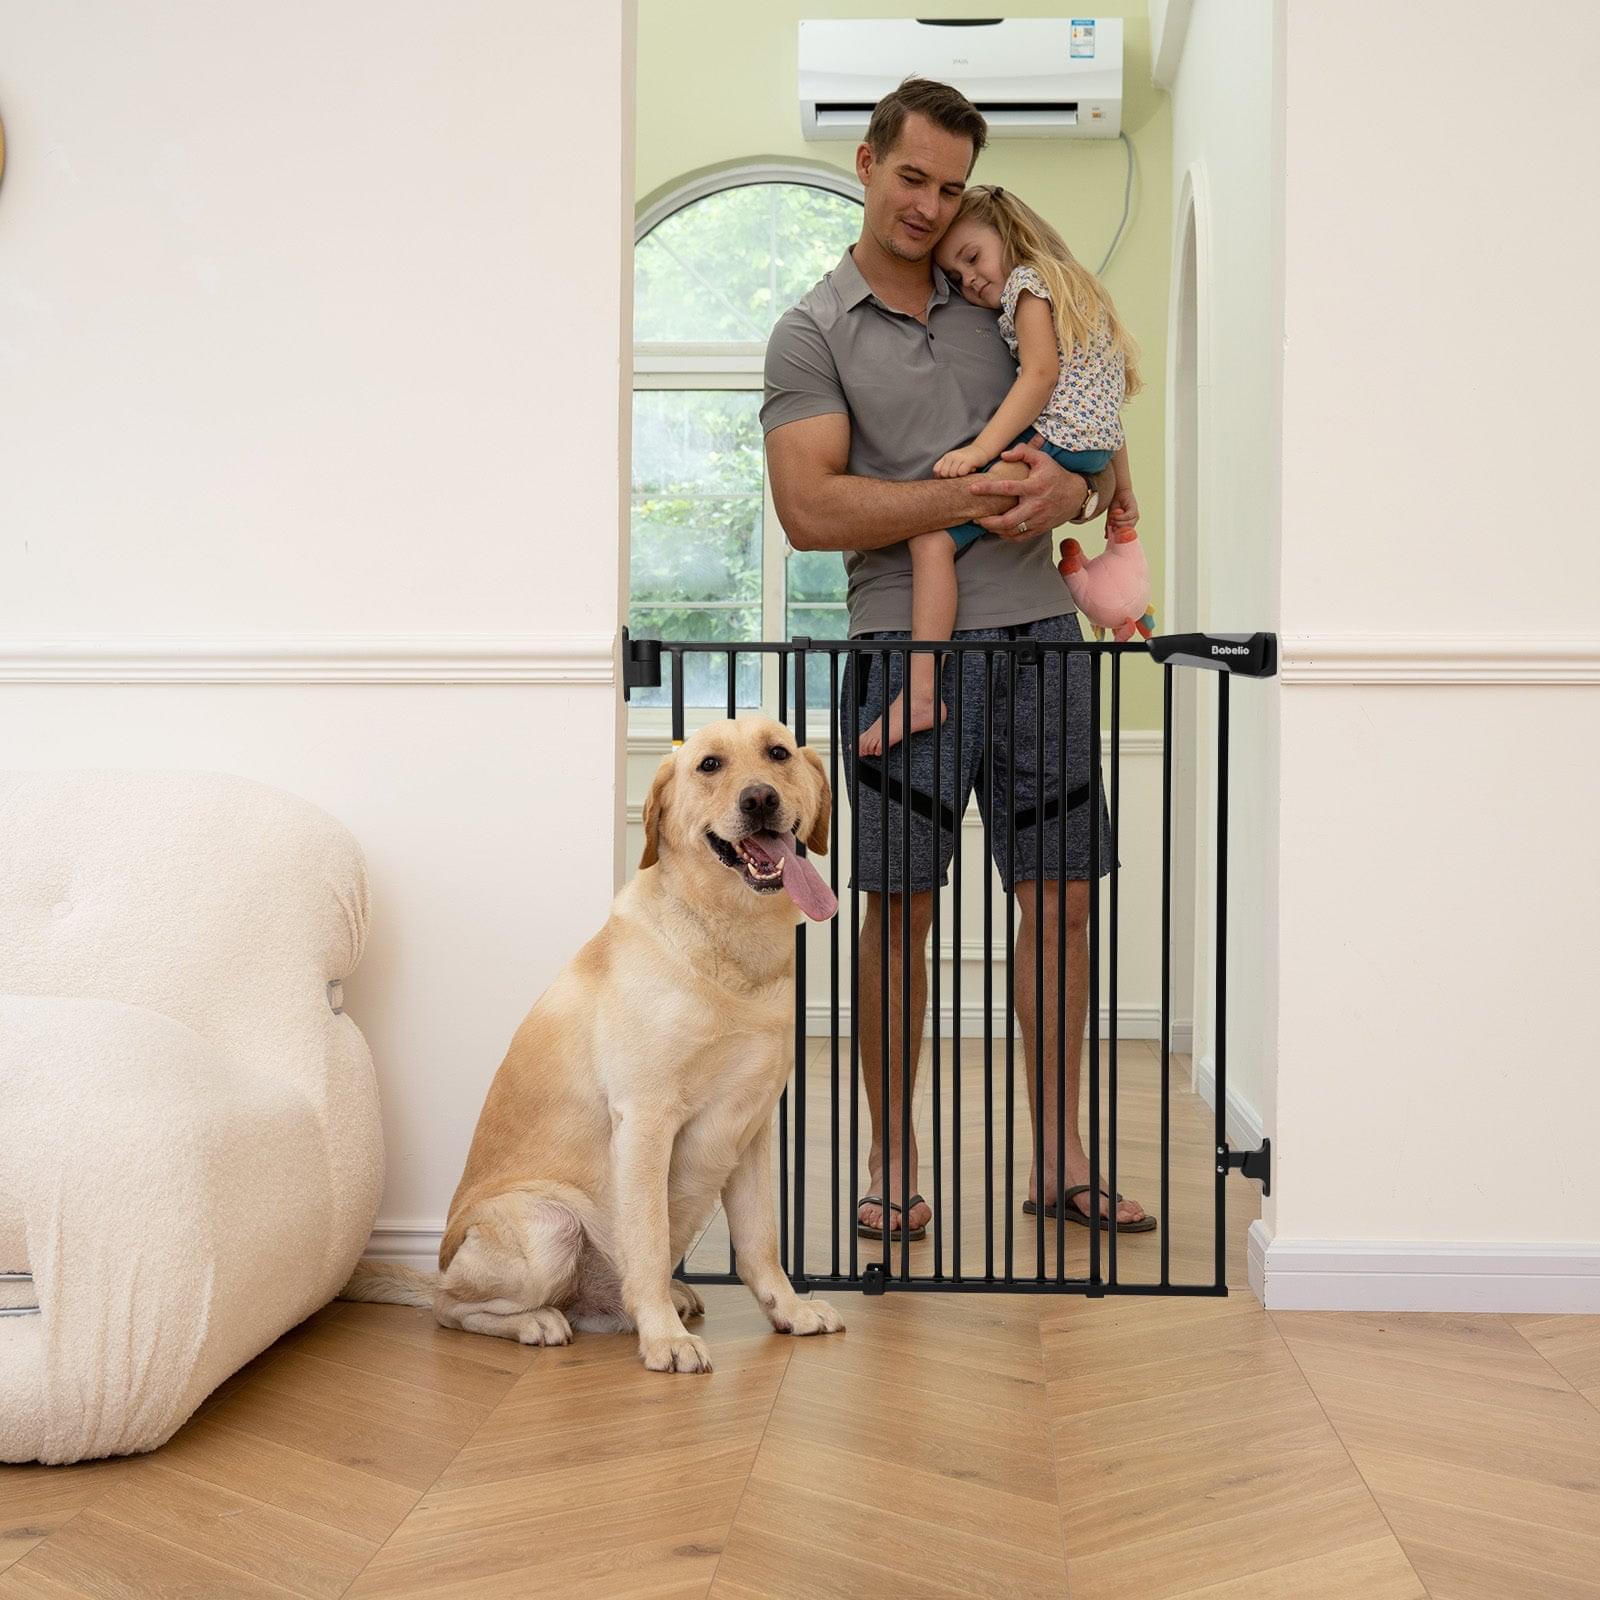 Babelio 34" Extra Tall Baby/Dog Gate with No Threshold Design Walk Thru Door, 26-43" Auto Close Safety Gate for Babies, Elders and Pets - babeliobaby